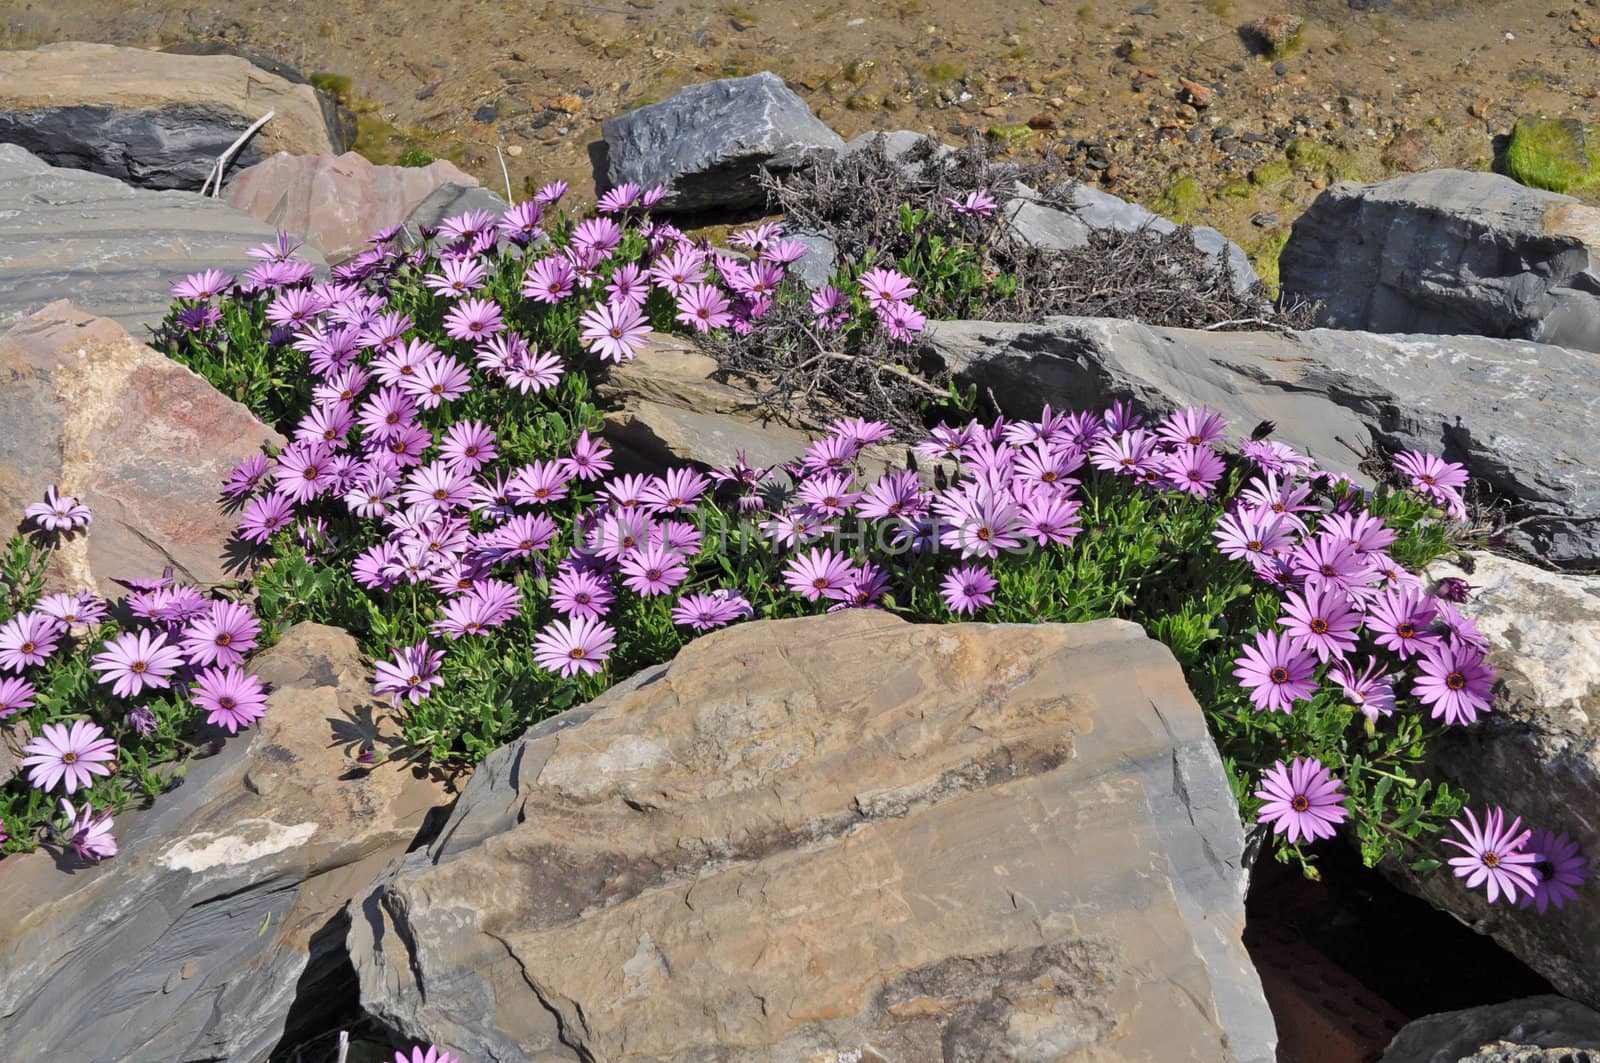 Violet spring flowers on the stone